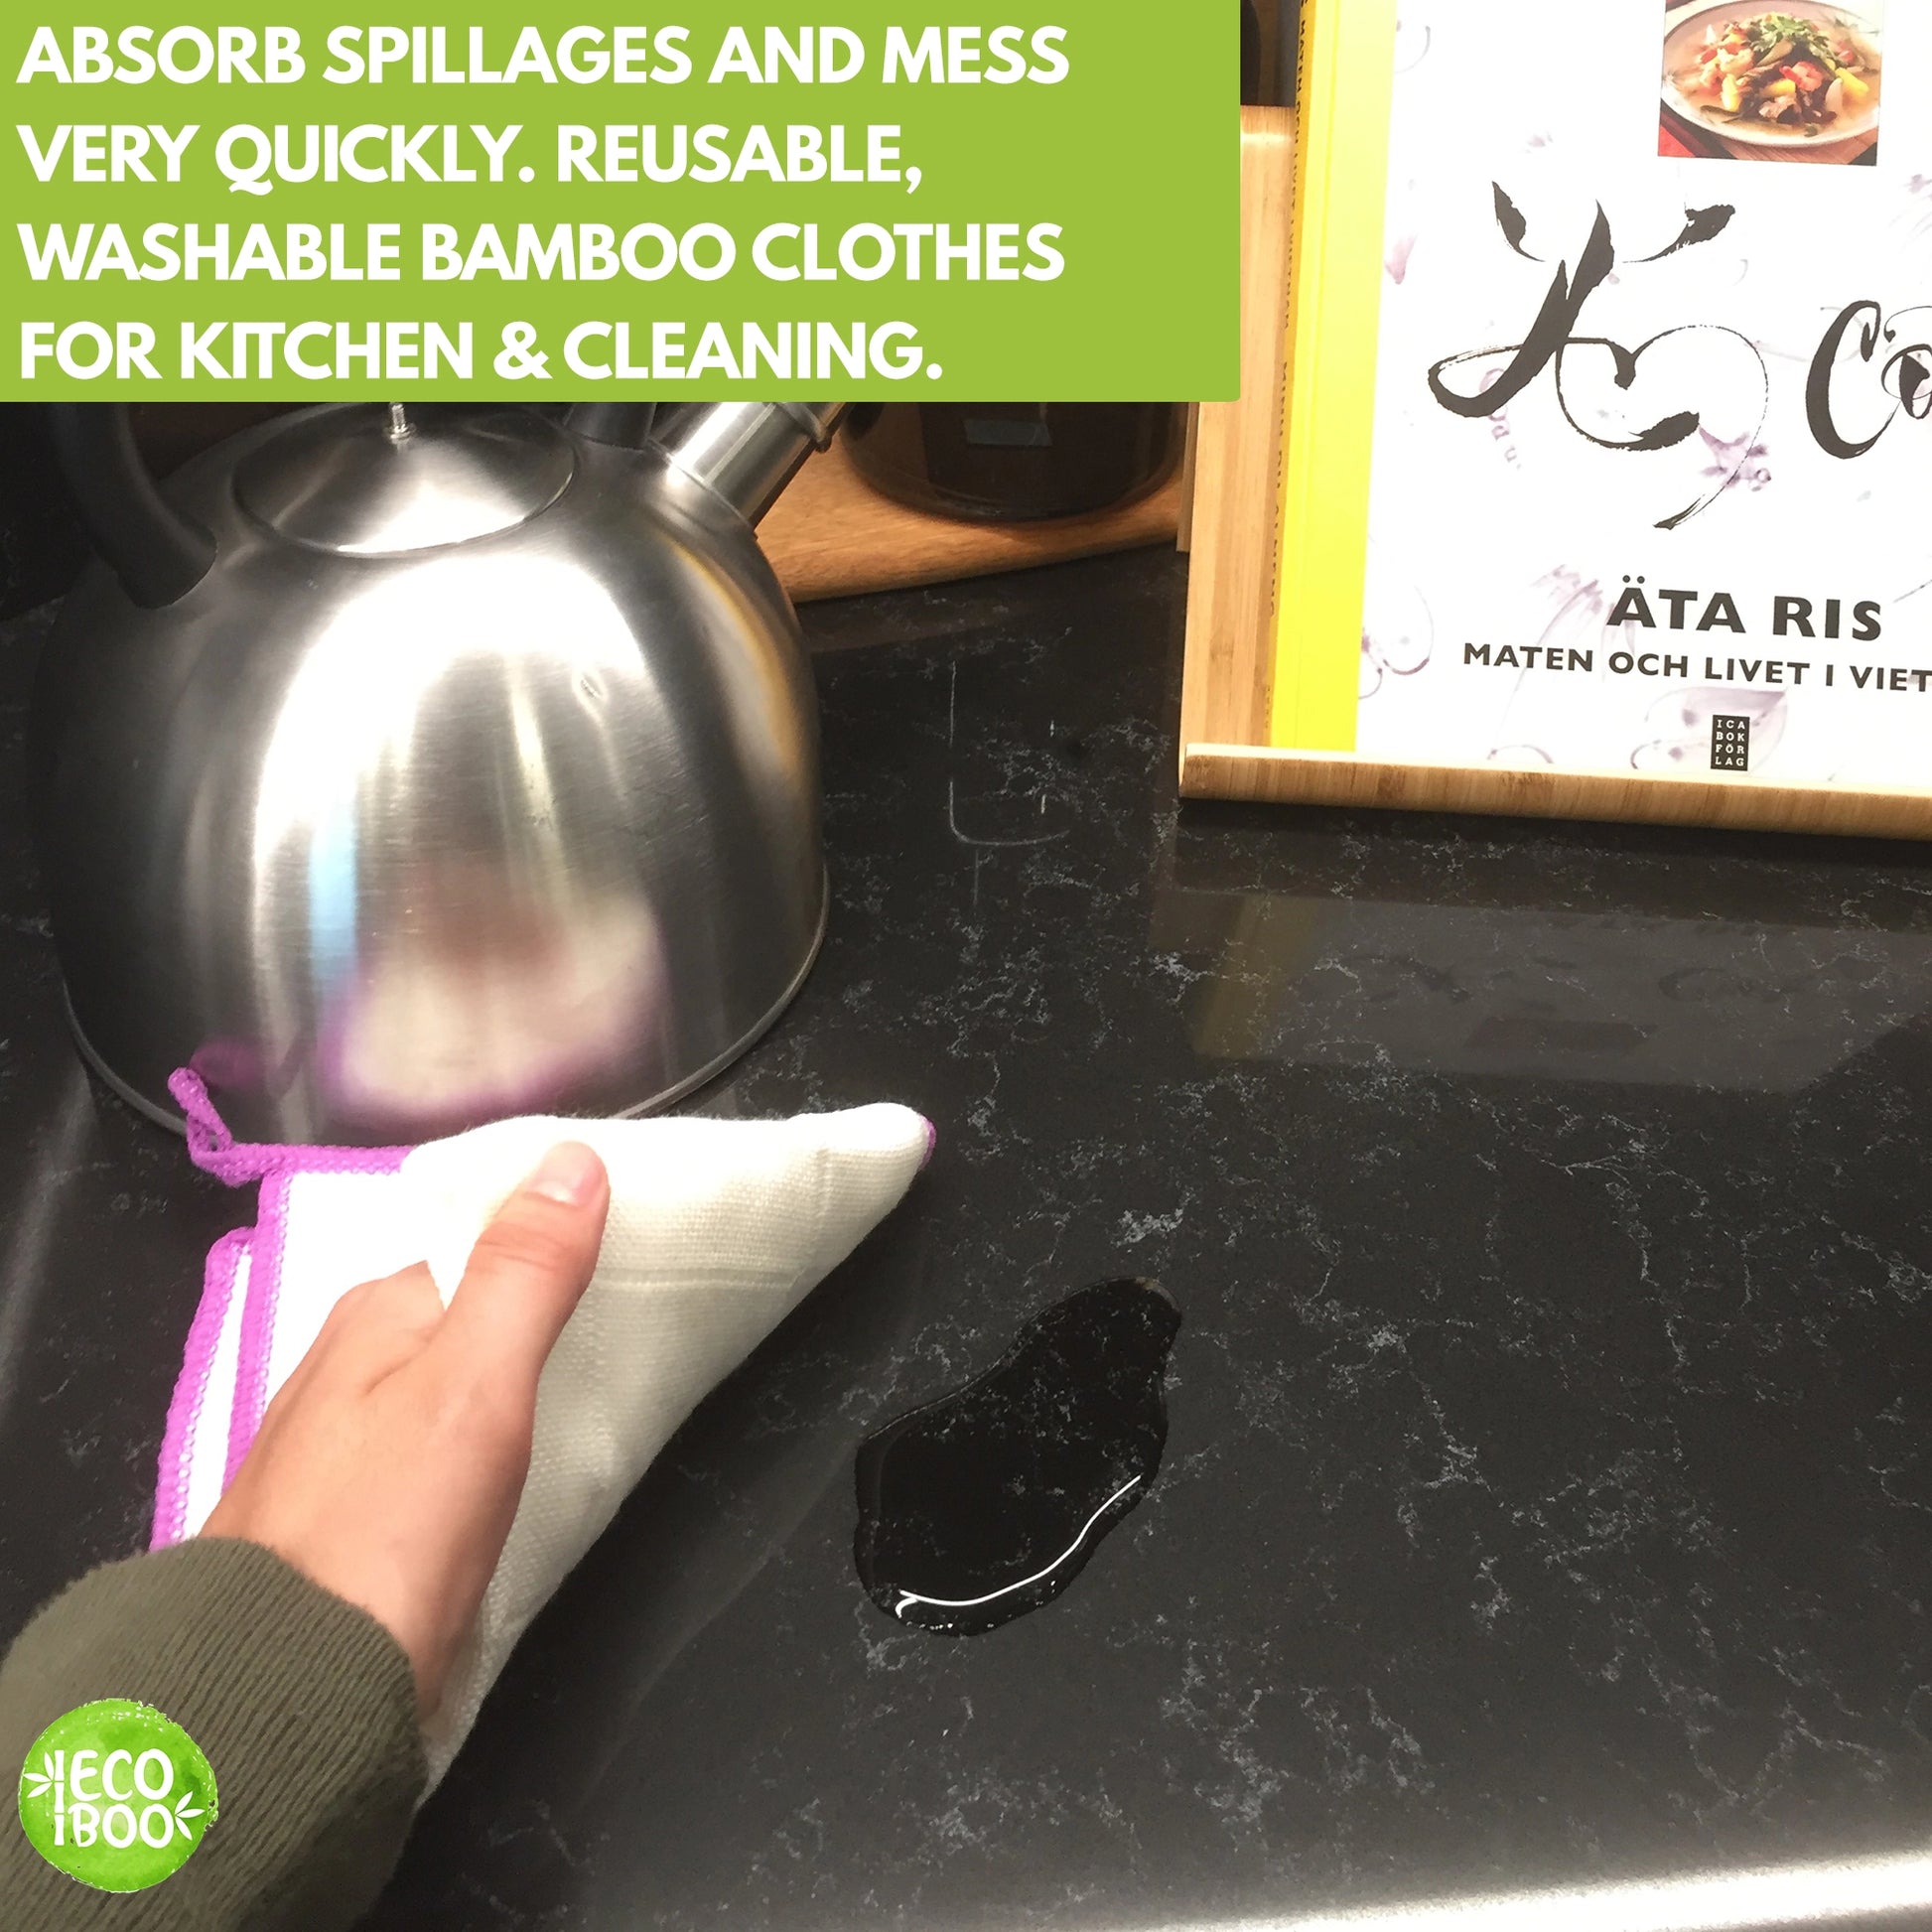 Clean counter tops with reusable unpaper cloths. Your easy-access paper towel for wiping down counters and cleaning up after meal prep.